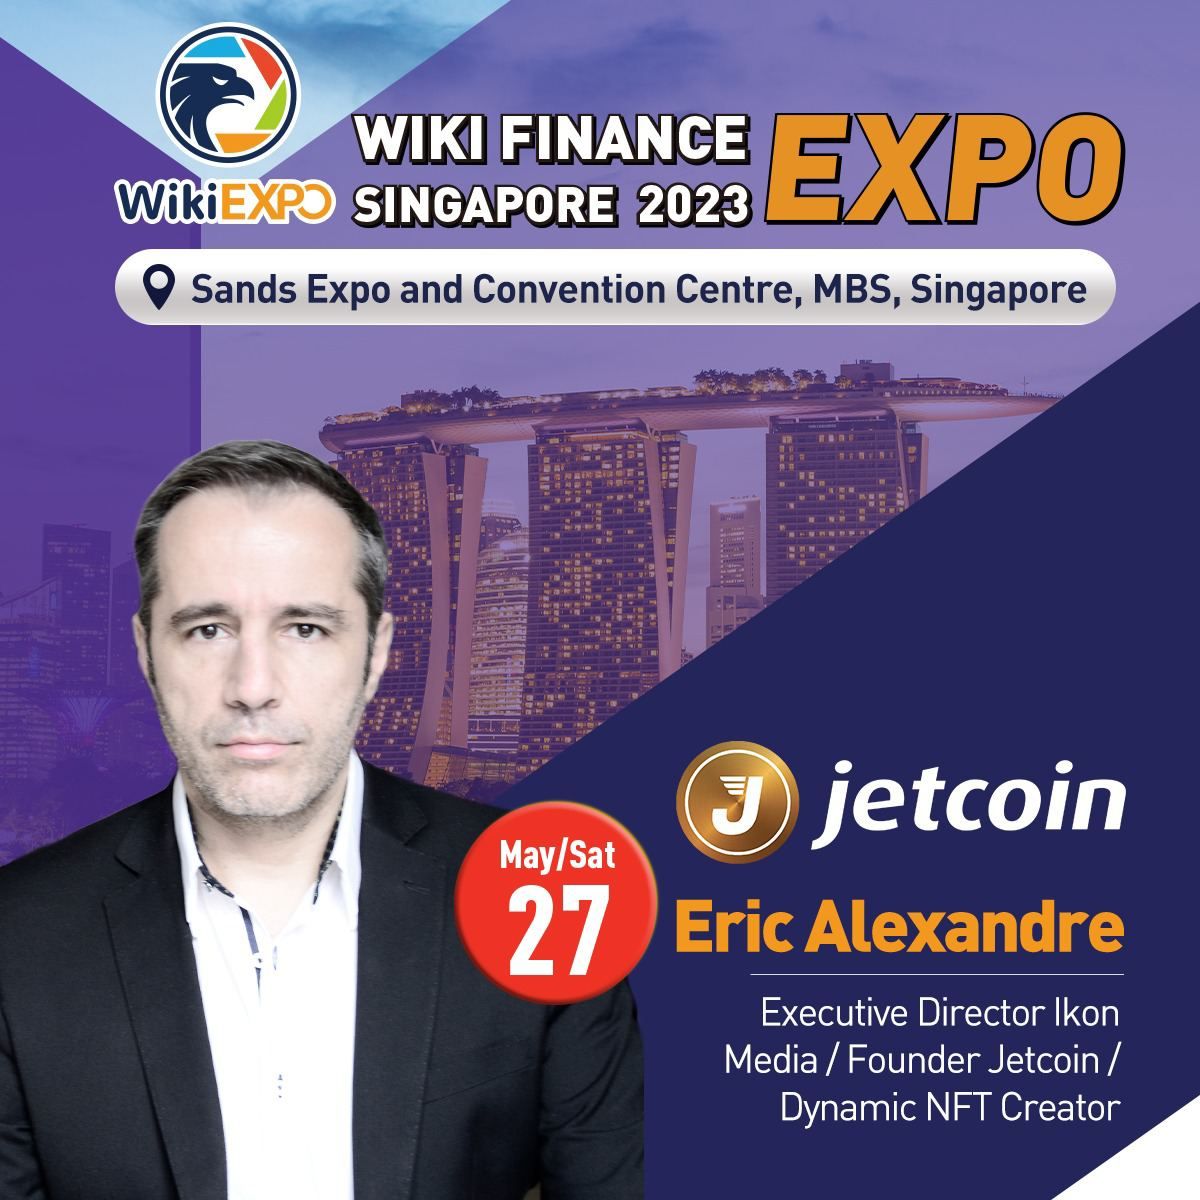 📣📣📣Hey everyone!

✨✨Jetcoin CEO Mr Eric Alexandre will be speaking and happy to share  about NFT Tech at the Wiki Finance Expo

#MBS 
#WikiFinanceExpo
🎆More informations please check and visit this link below
👇😉

☑️ activities.wikiexpo.com/Singapore/2023…